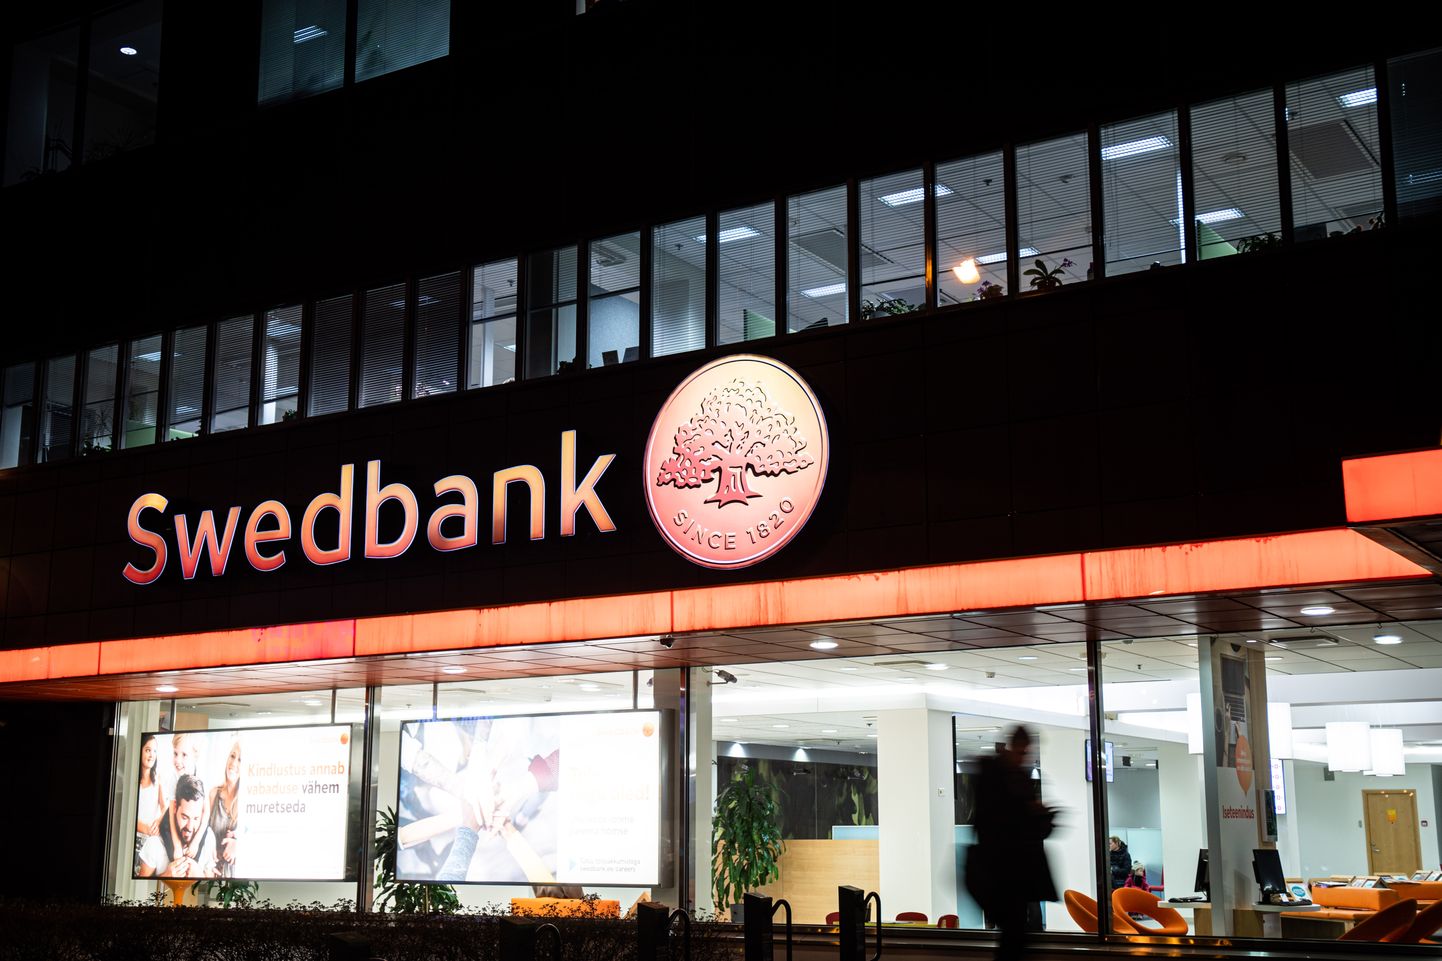 The Office of the Prosecutor General has ended the criminal investigation initiated against Swedbank Estonia for suspected money laundering, due to insufficient information to prove the crime.